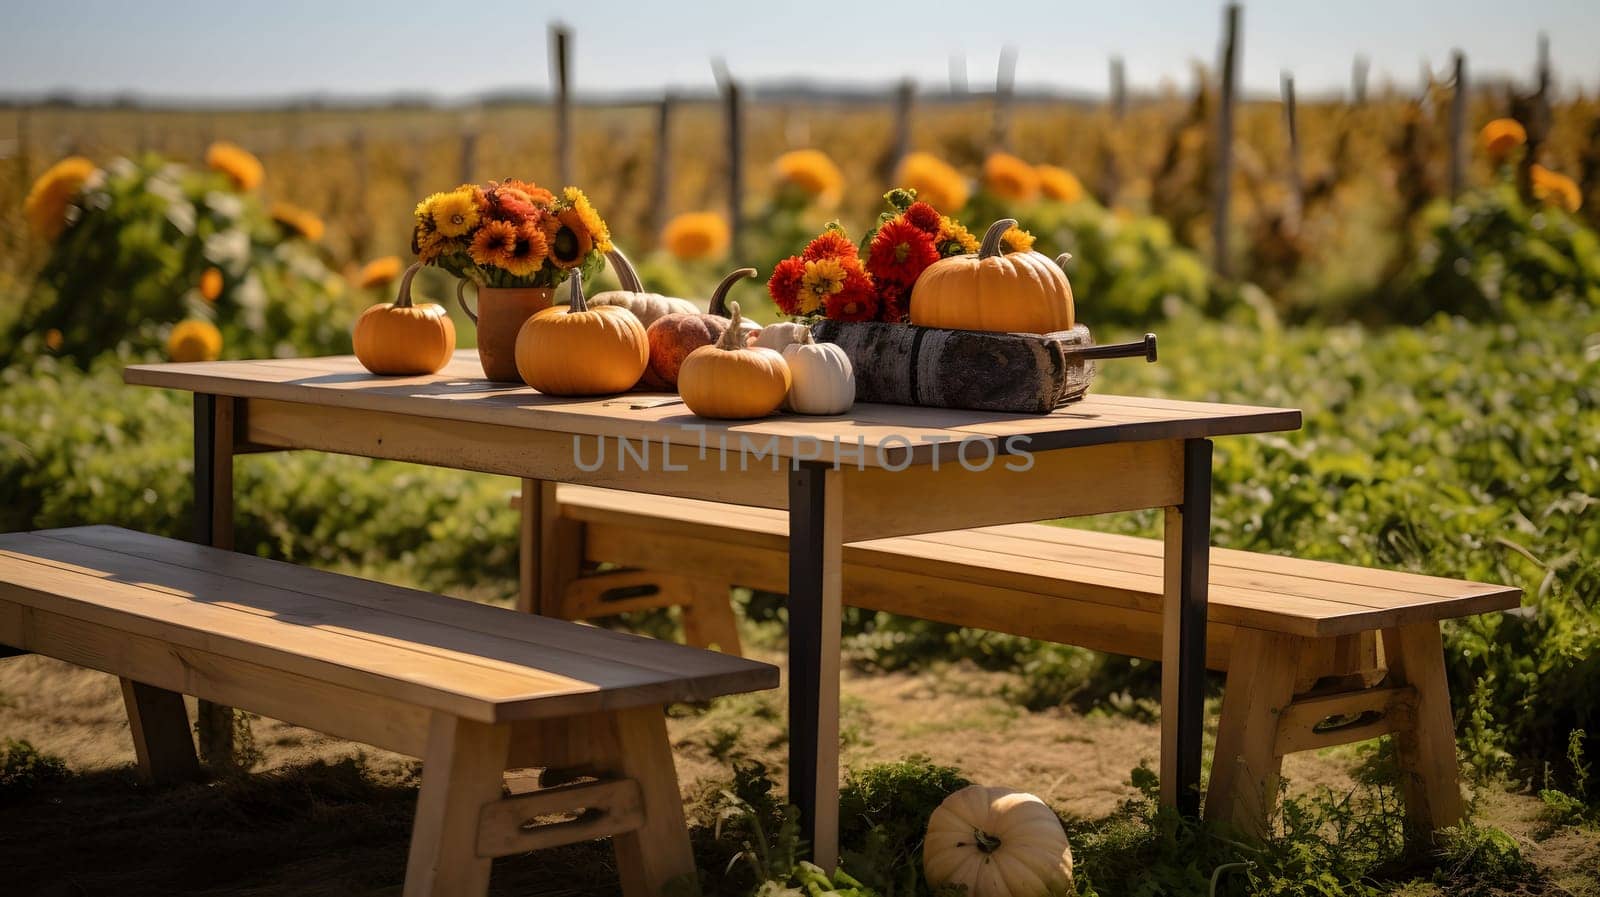 Photo of a wooden table with benches, and on it plates of pumpkins in the background field. Pumpkin as a dish of thanksgiving for the harvest. An atmosphere of joy and celebration.